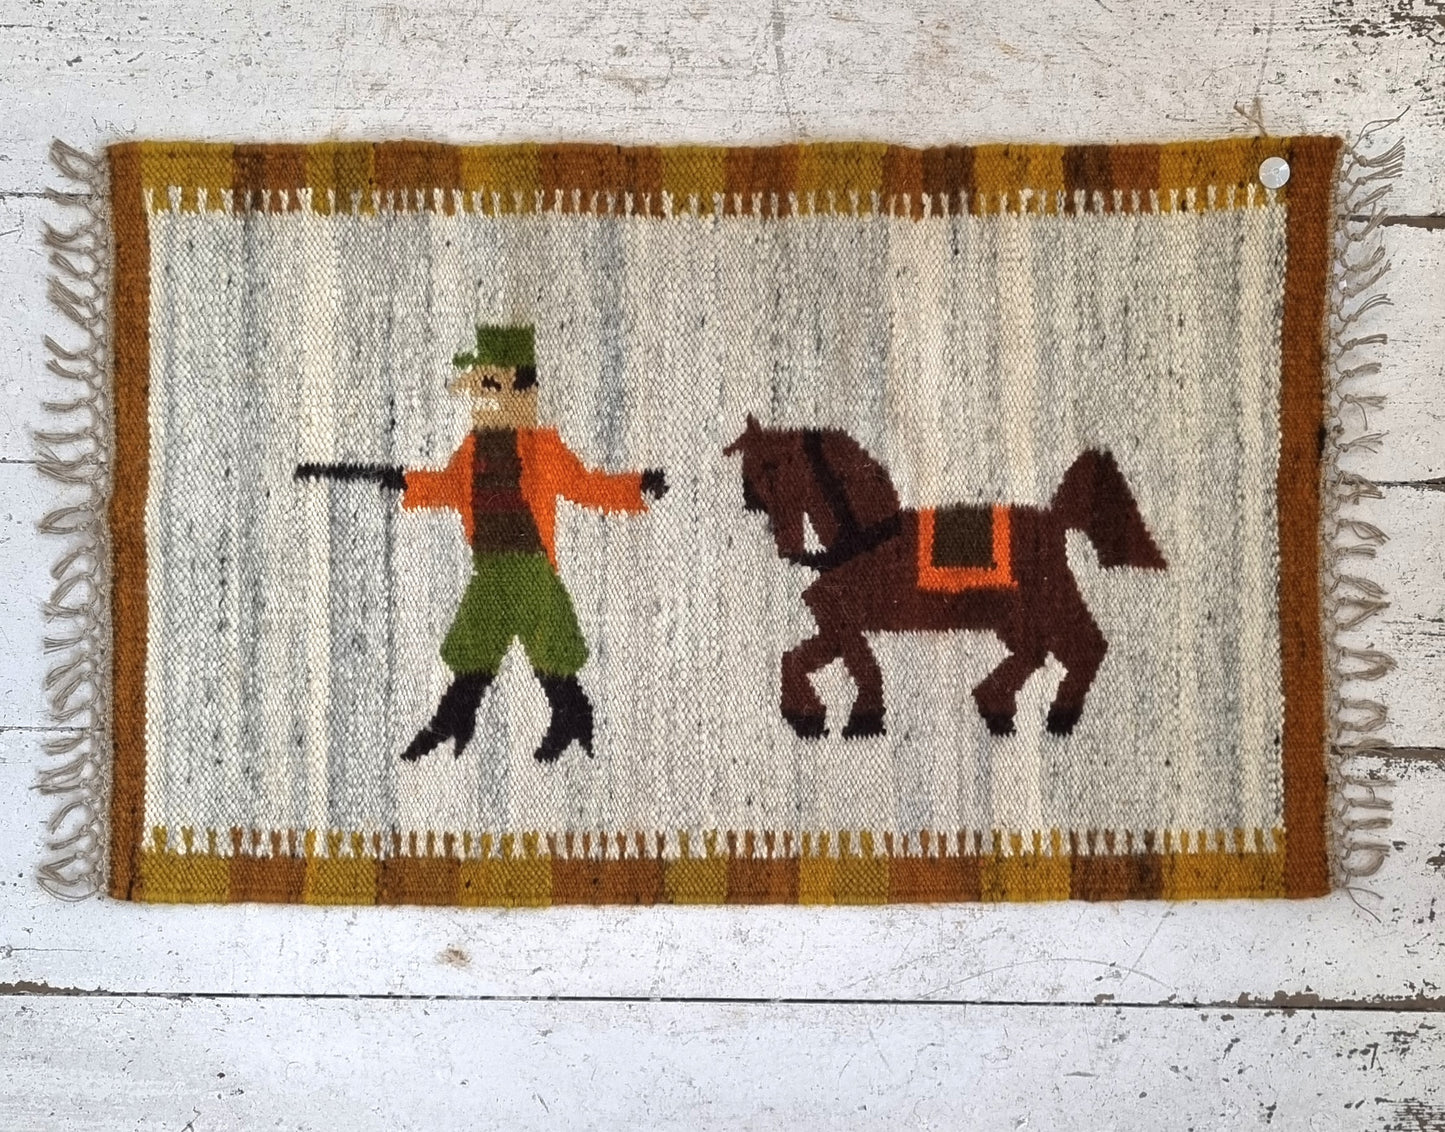 Vintage man and horse rug